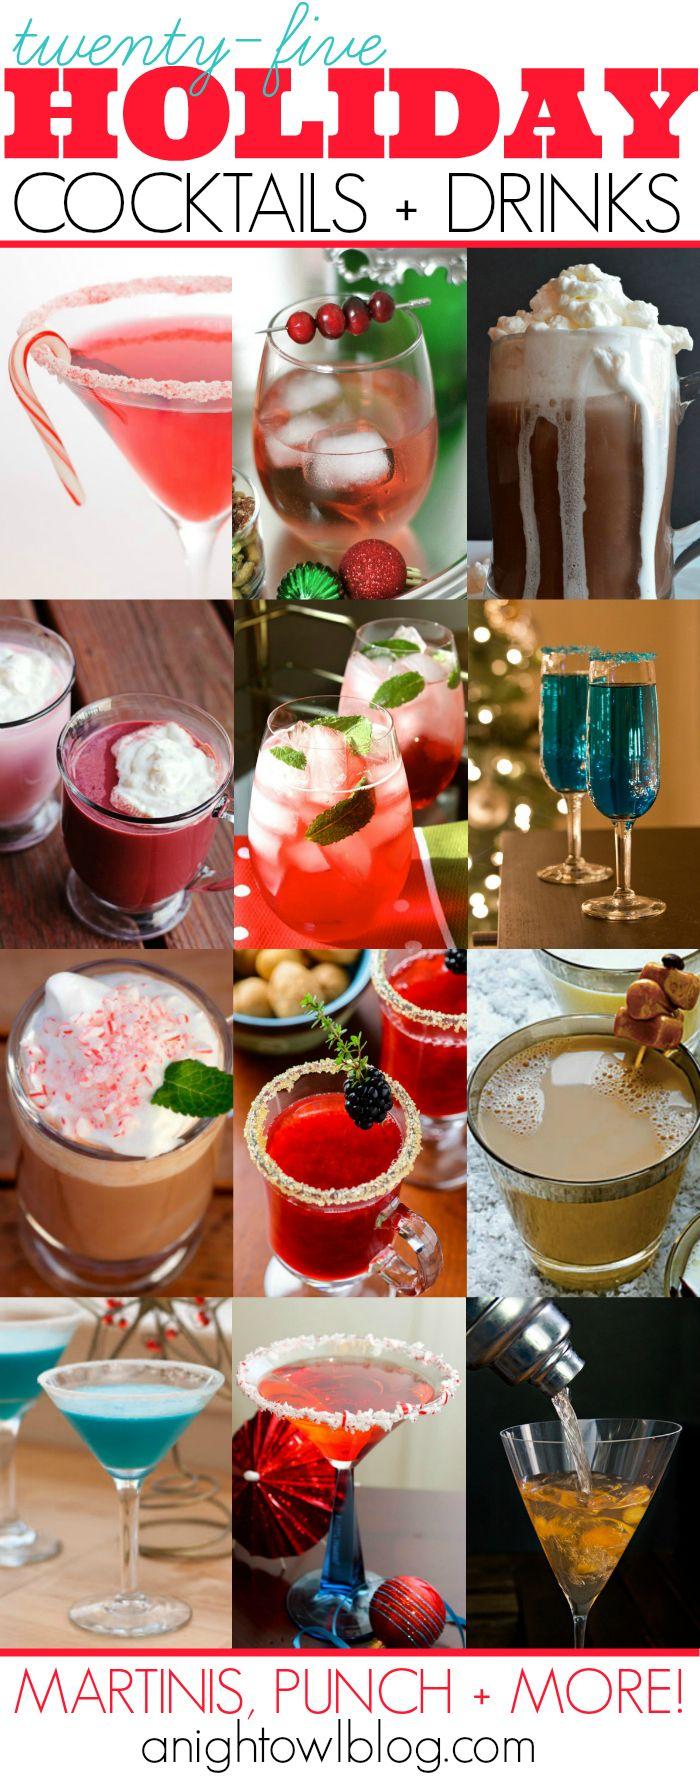 Wedding - 25 Holiday Cocktail Recipes